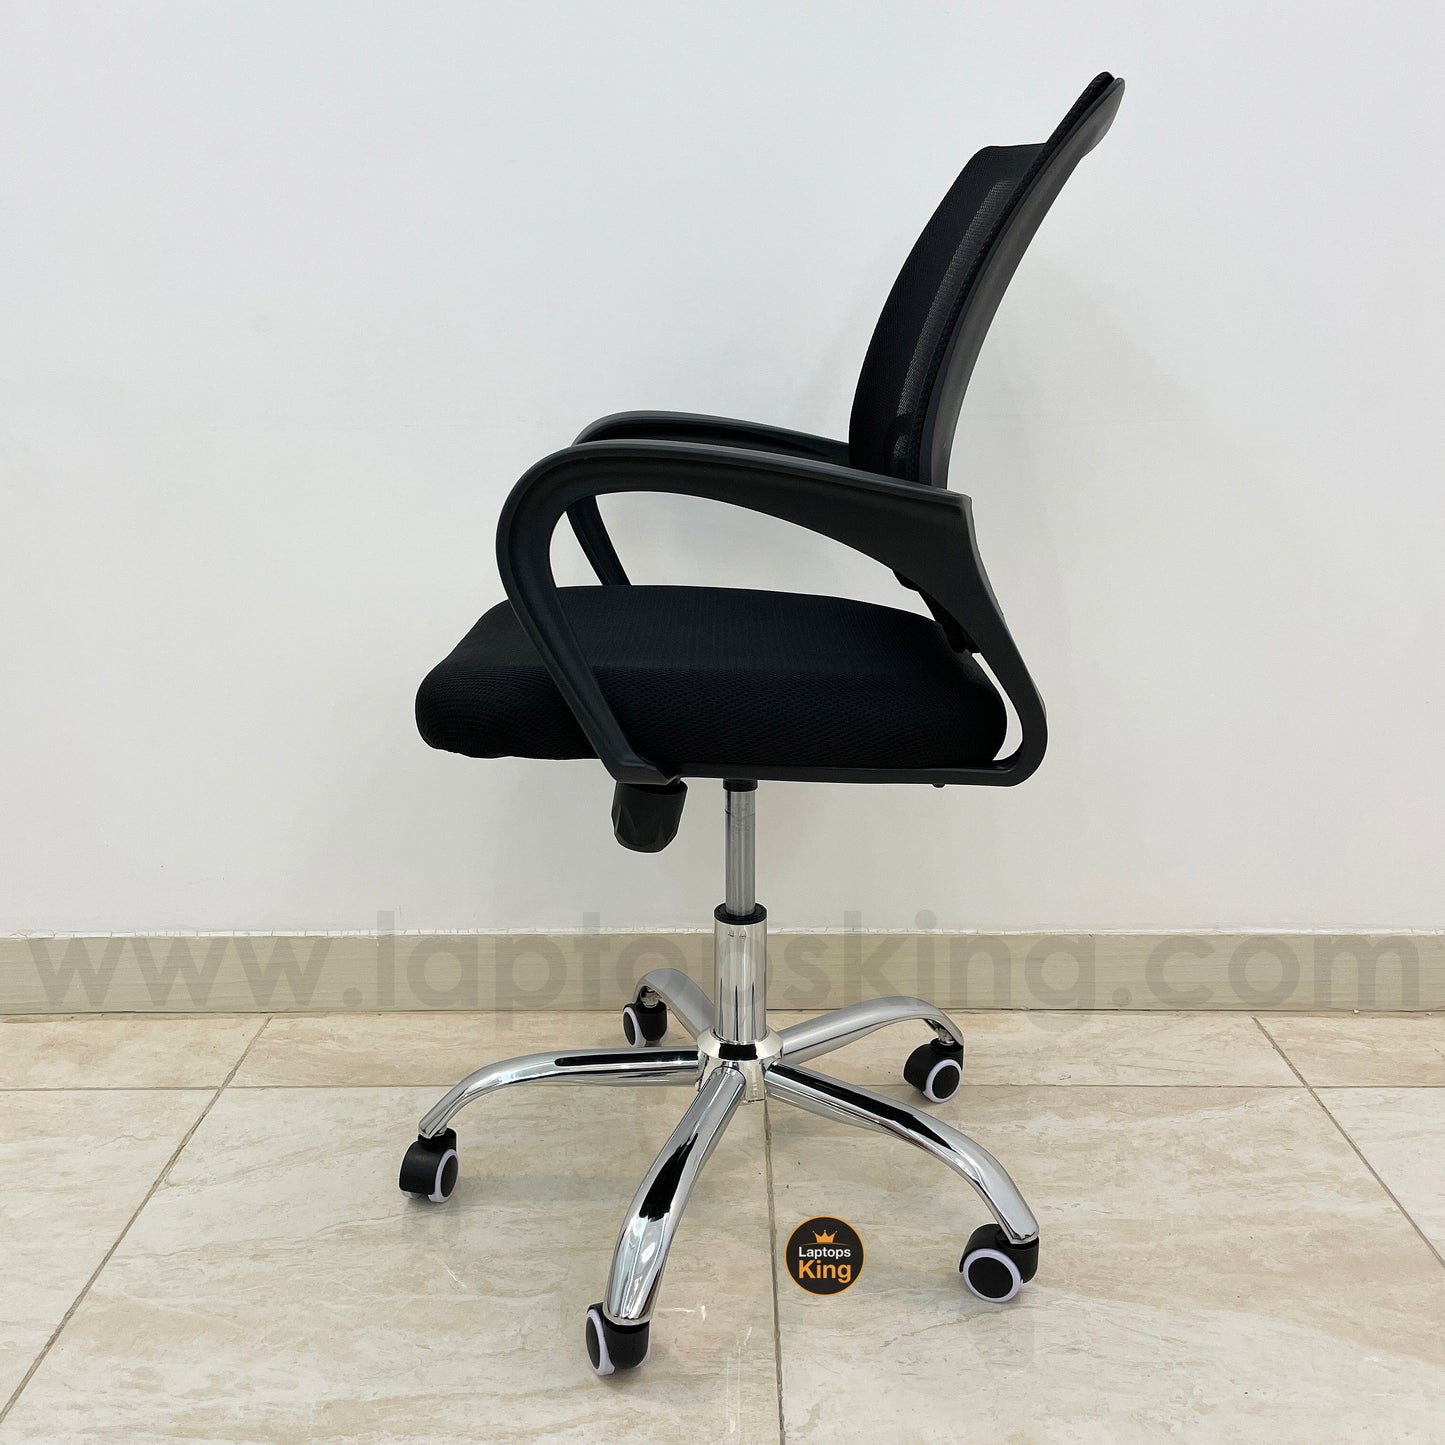 Xline XBS-2002 Office Chair (Brand New)